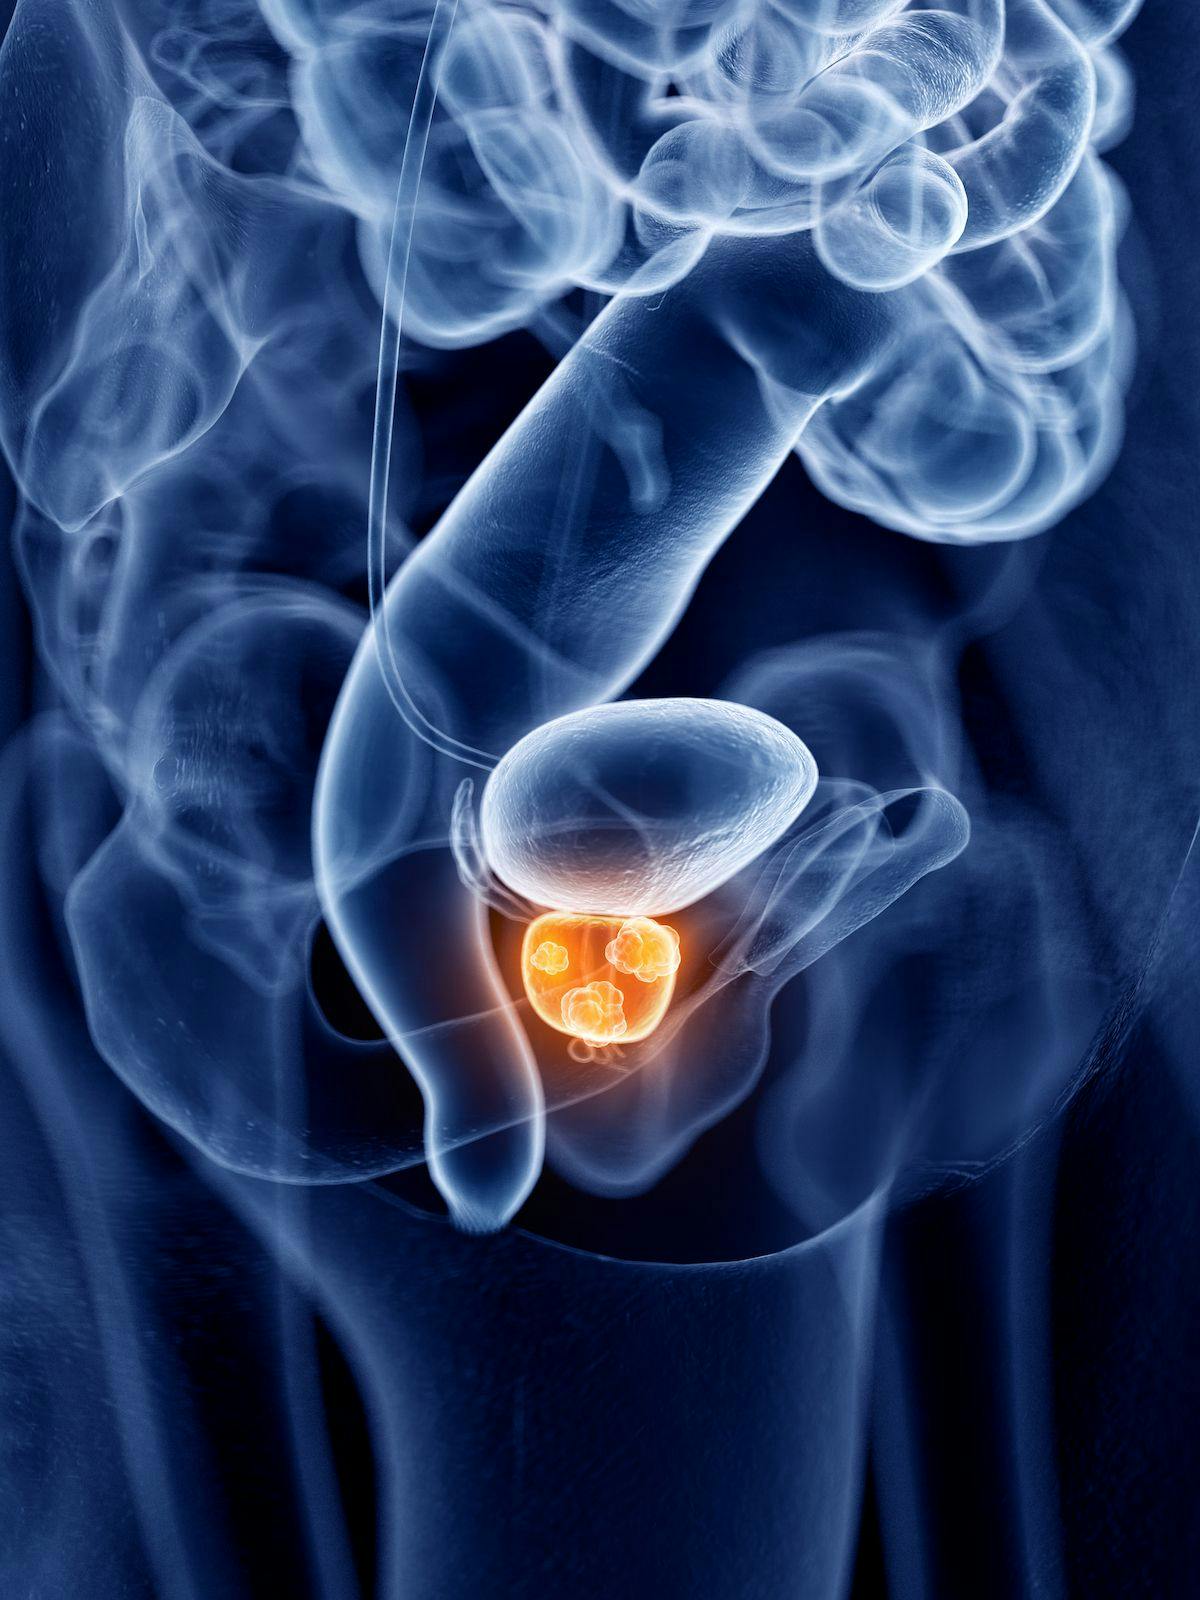 More research is needed to improve upon PSM for treating prostate cancer